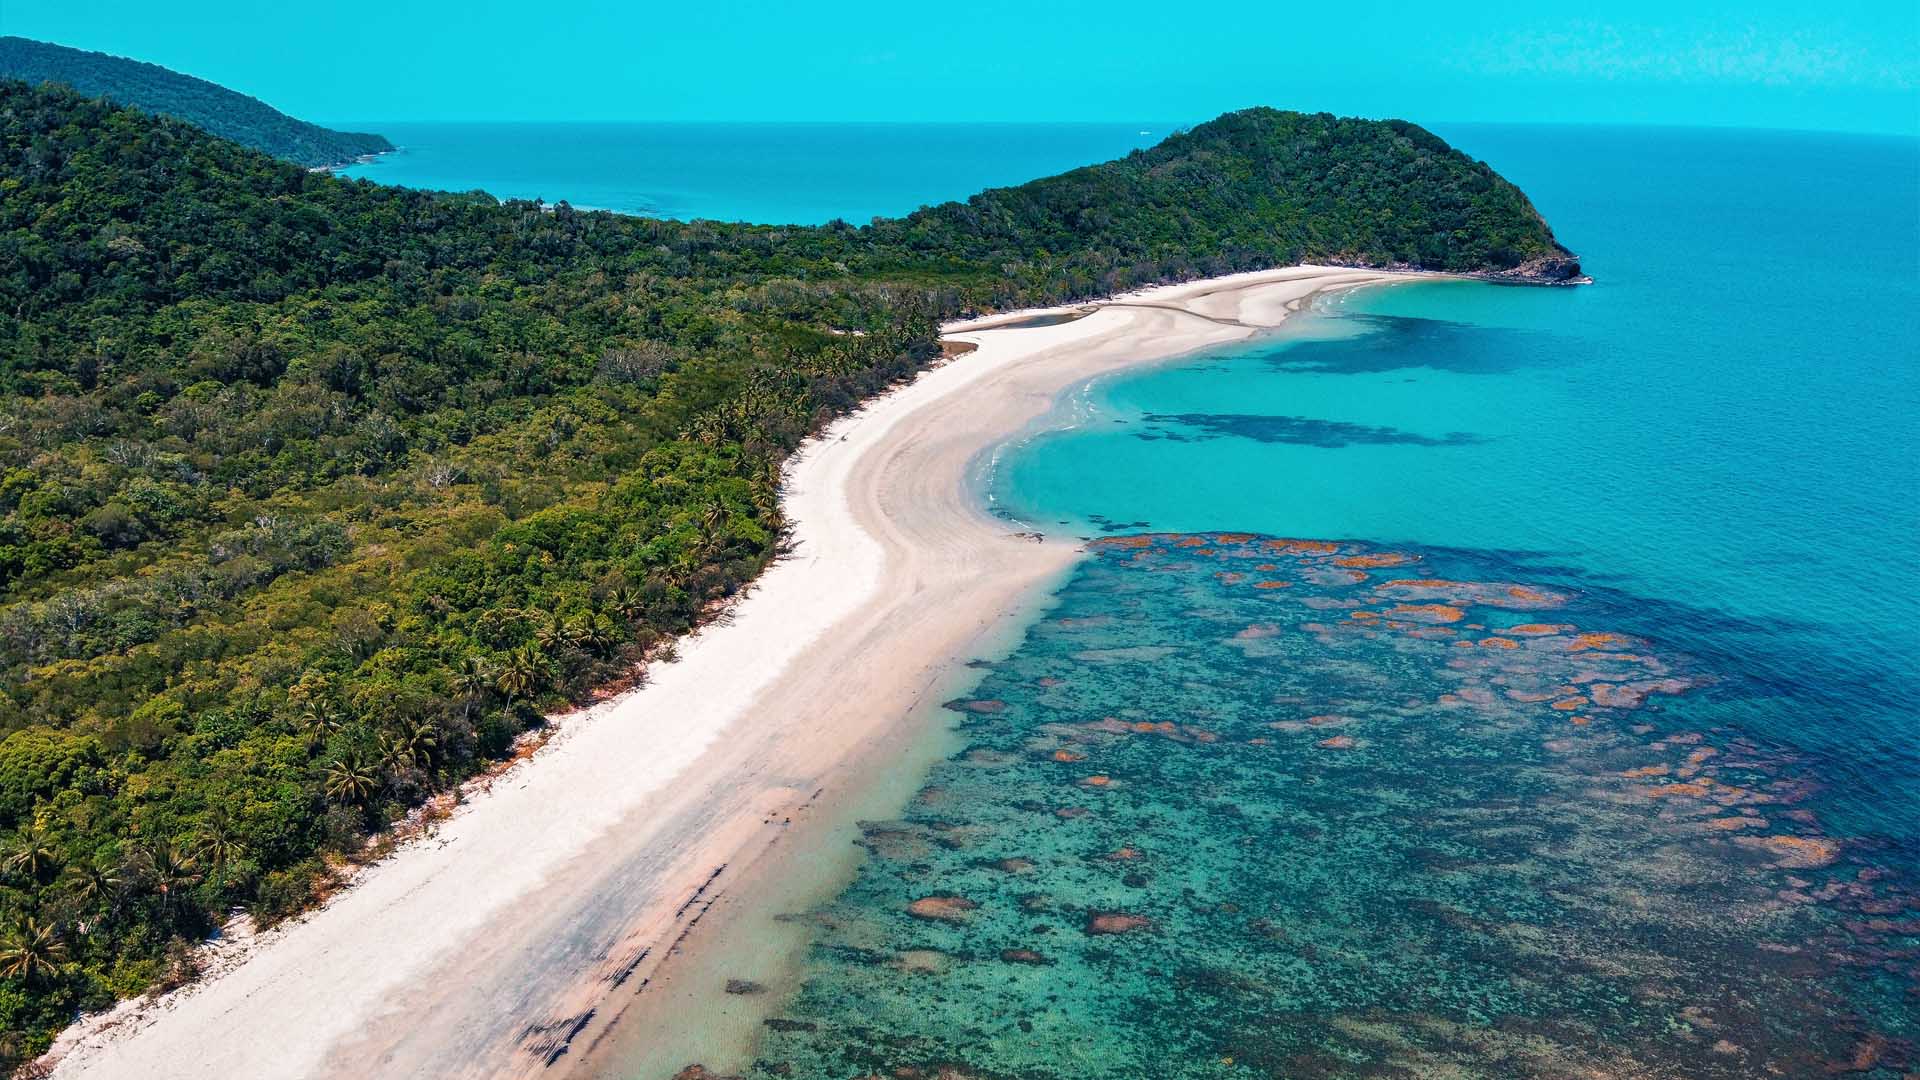 These New Queensland Travel Vouchers Will Give You $250 for Tours in the State's Tropical North